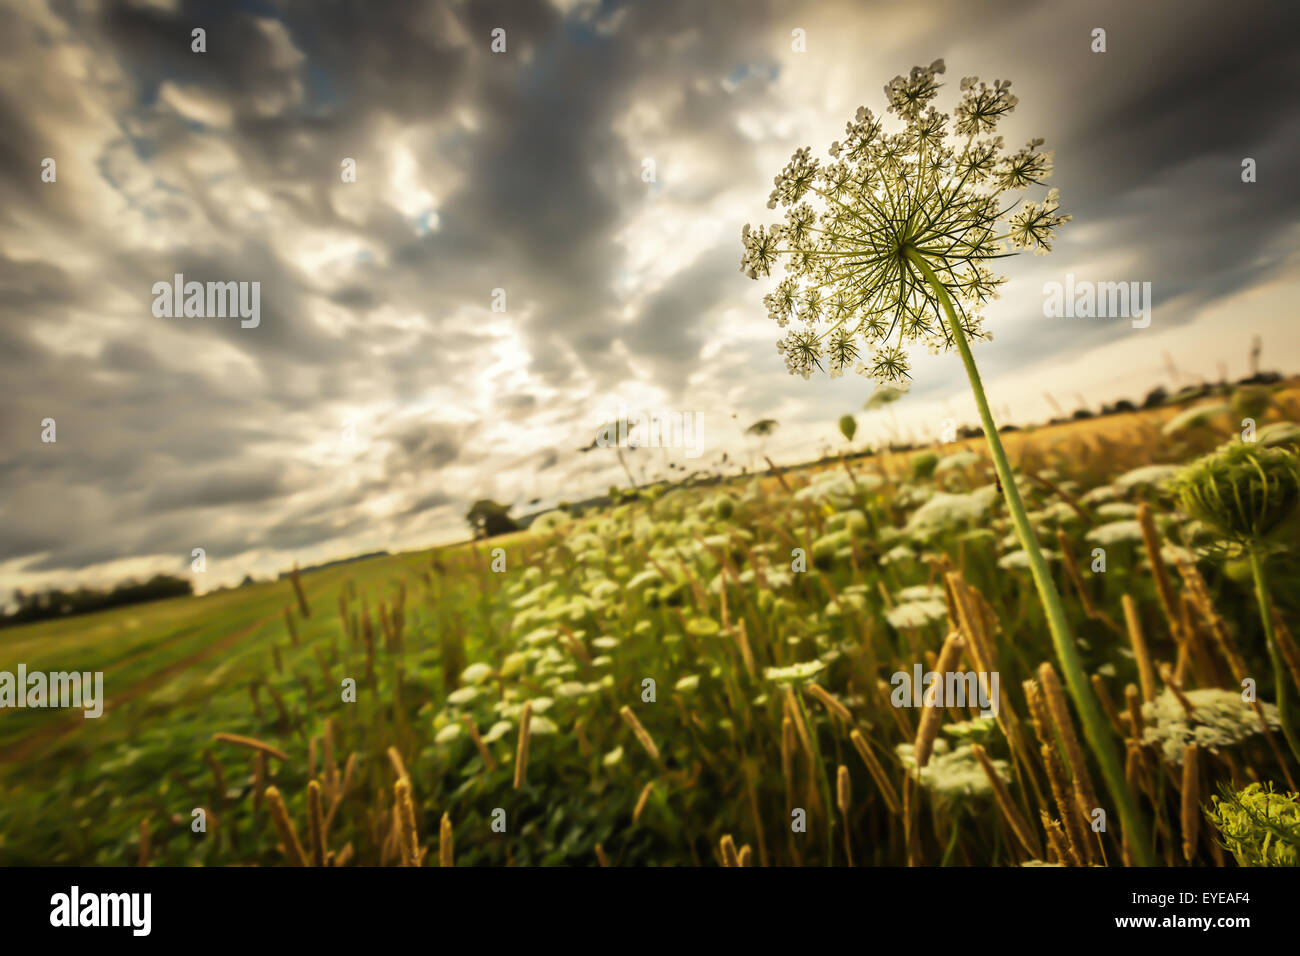 Wildflowers  on the edge of farm field and under stormy skies. Stock Photo